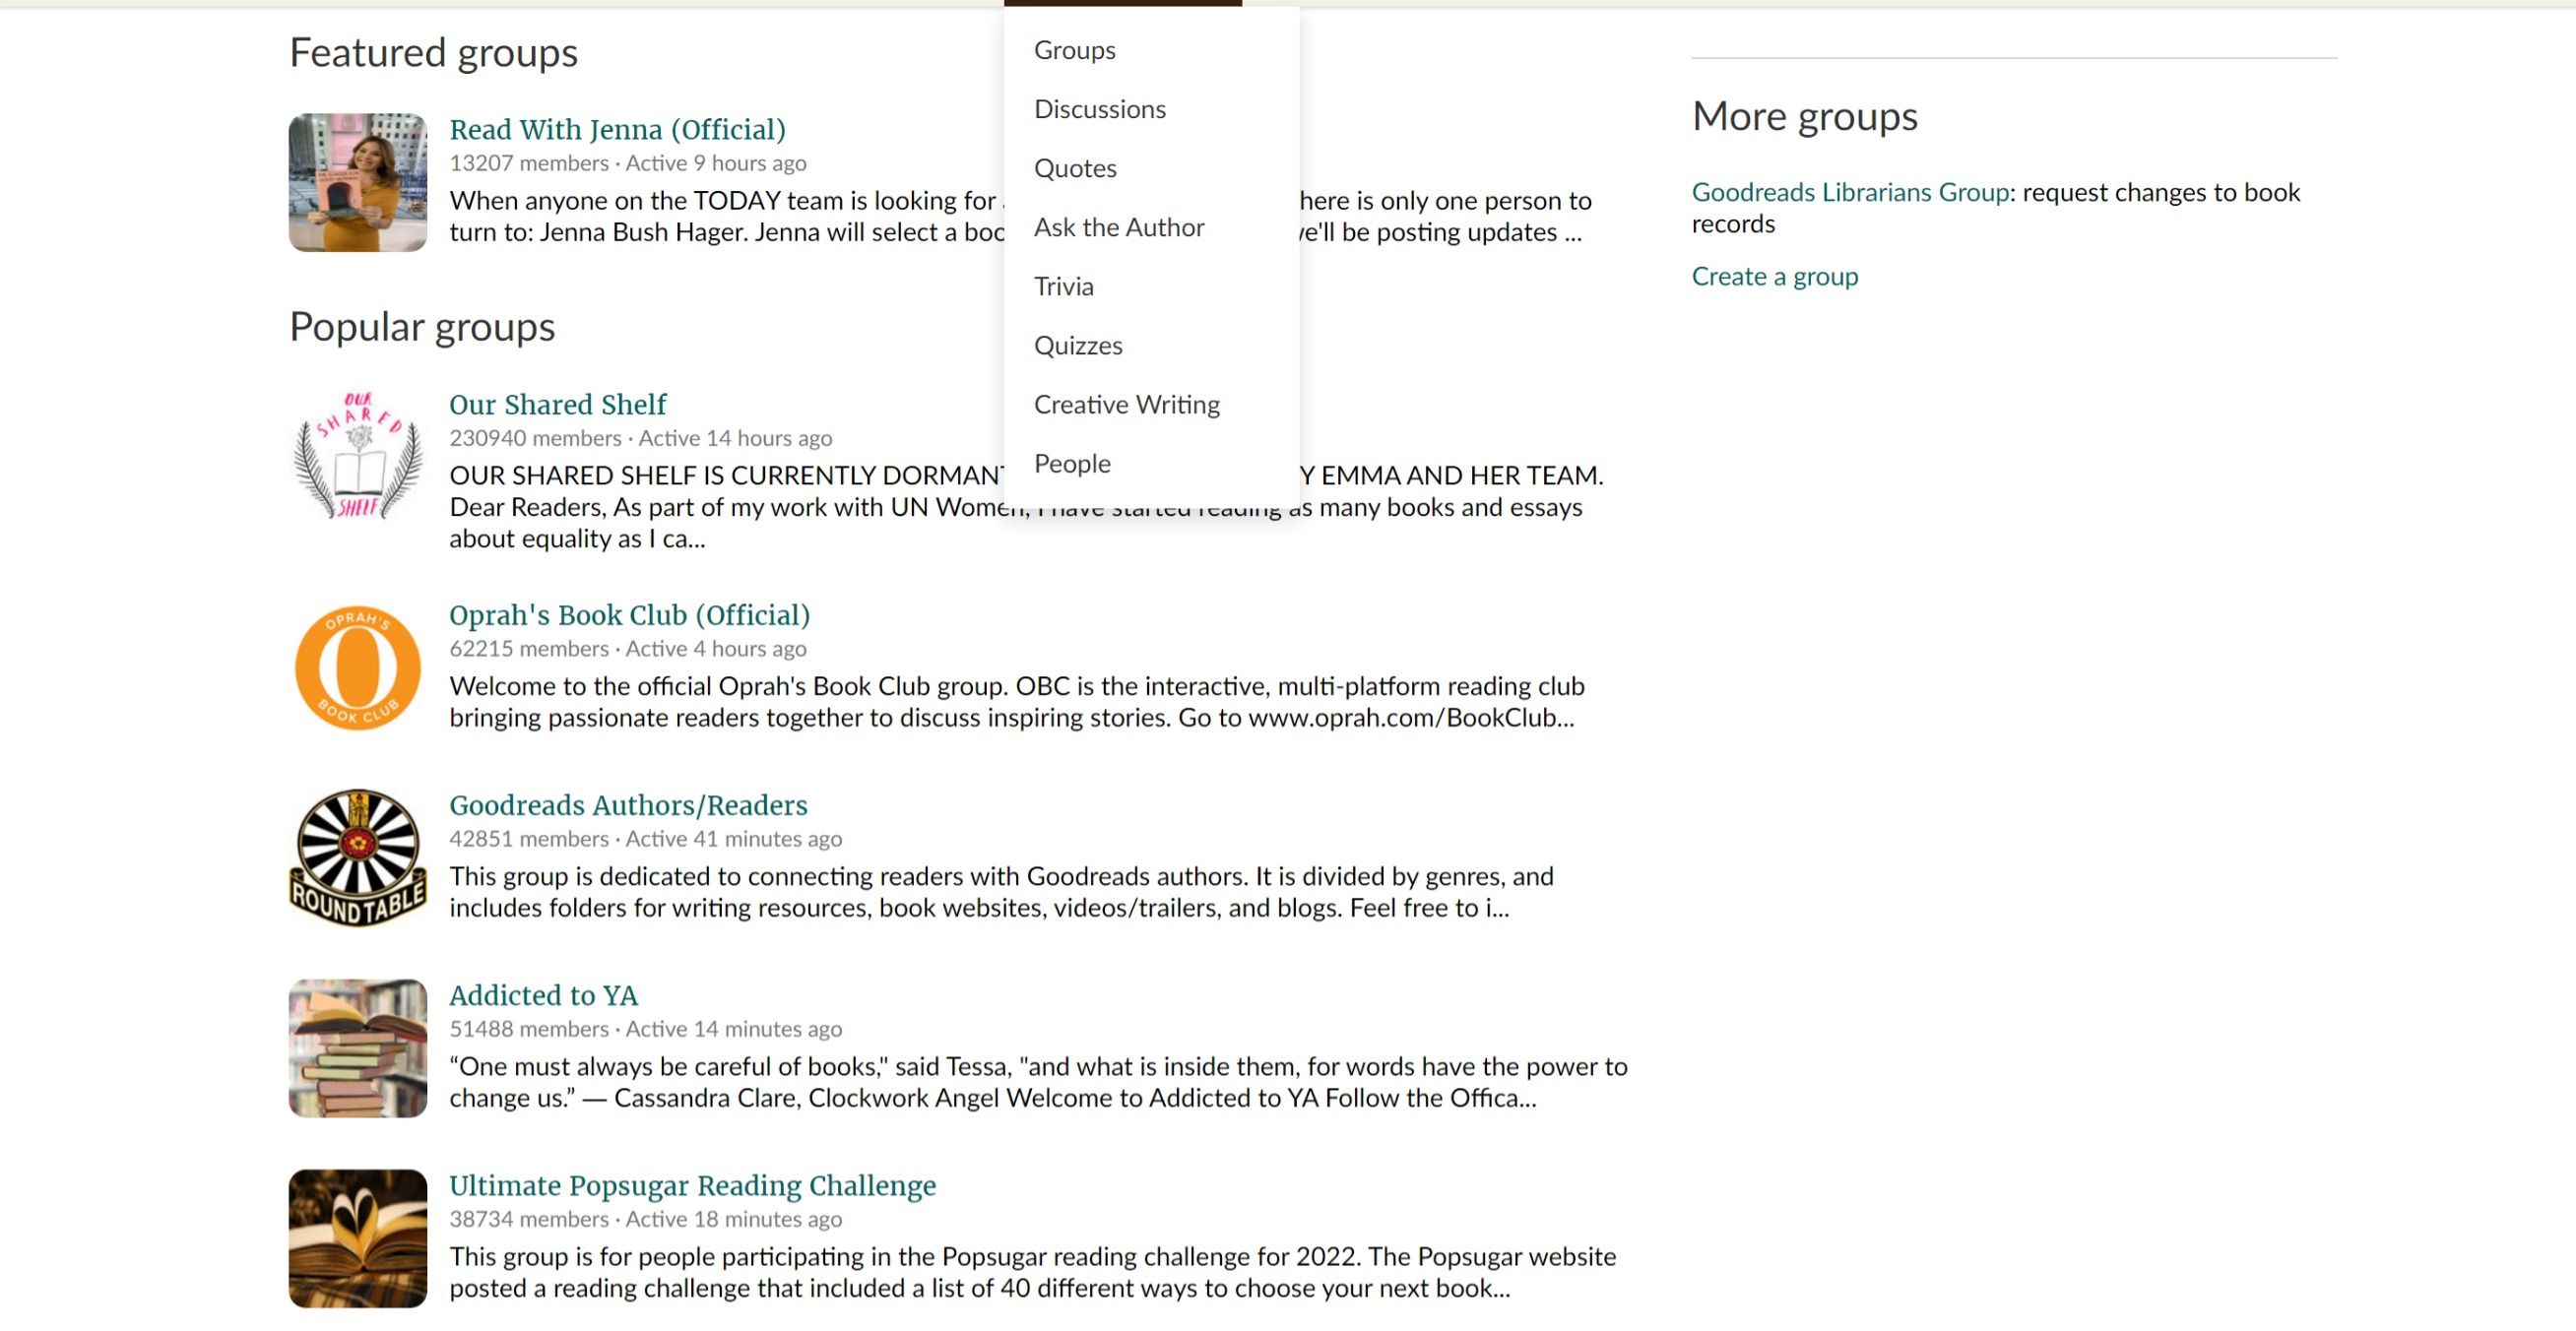 Goodreads community page, showing featured groups.